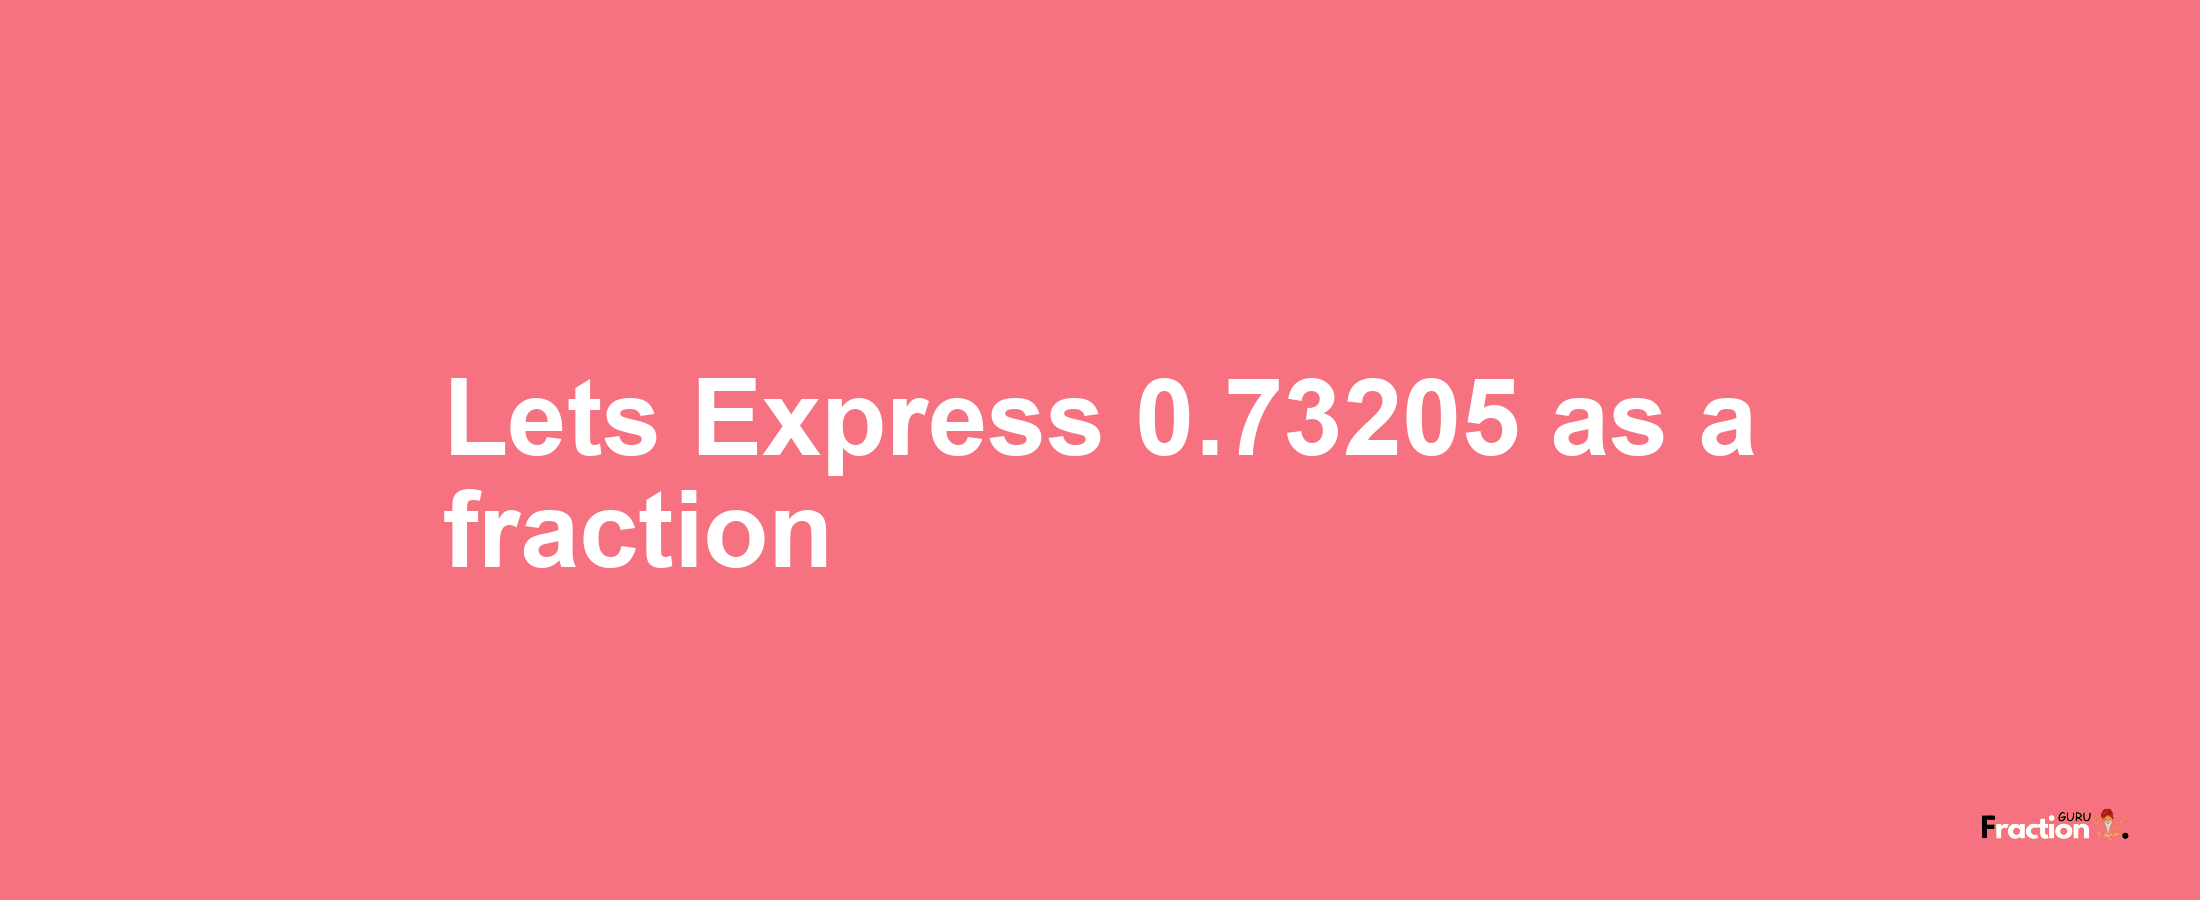 Lets Express 0.73205 as afraction